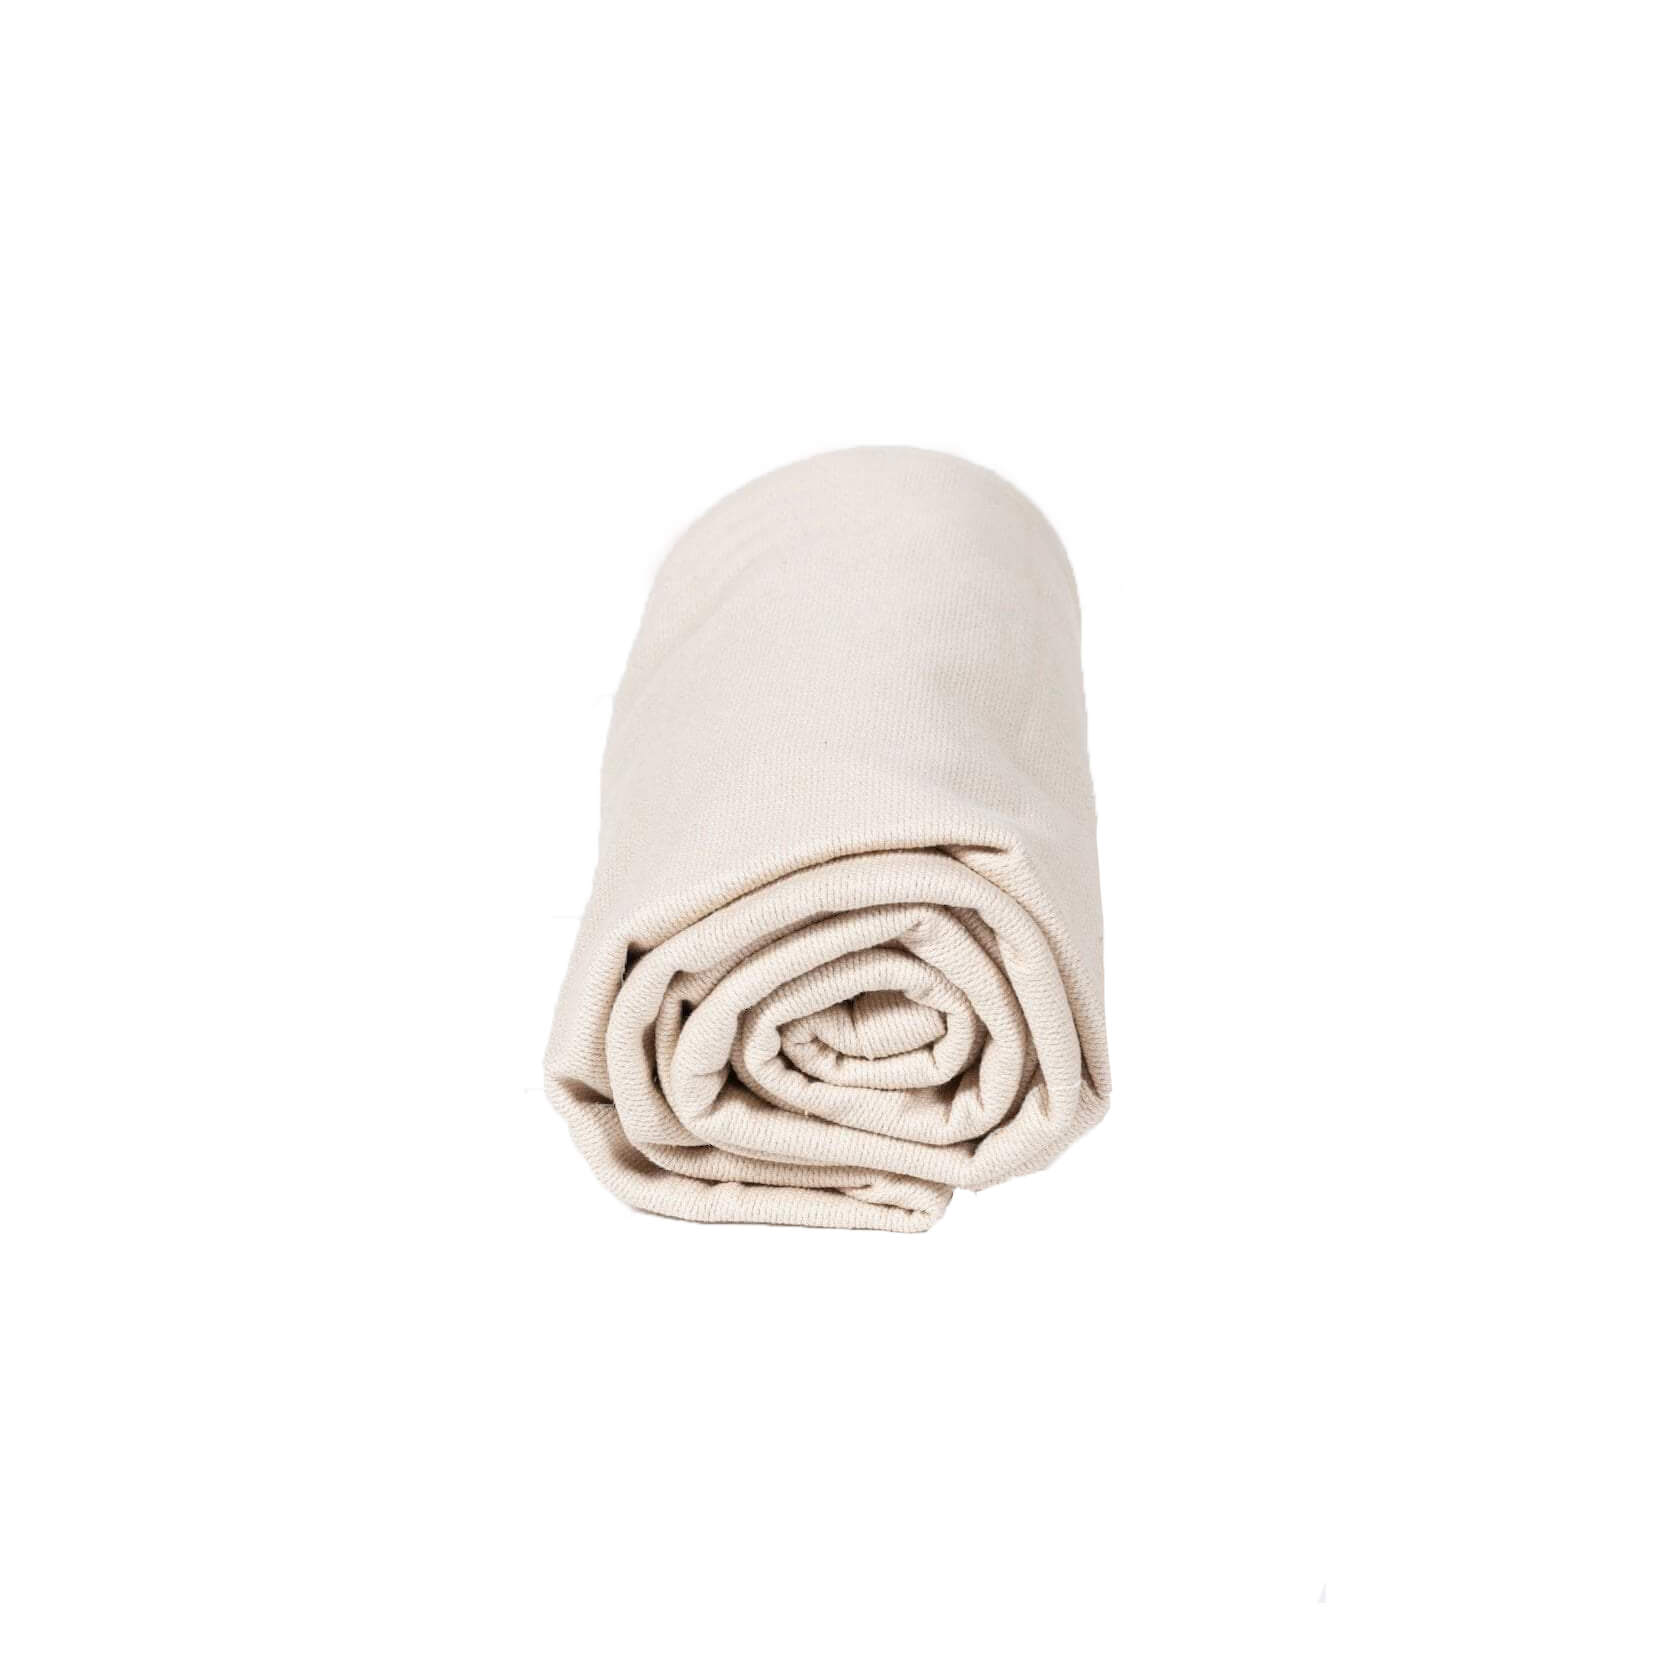 Rolled up cotton yoga blanket